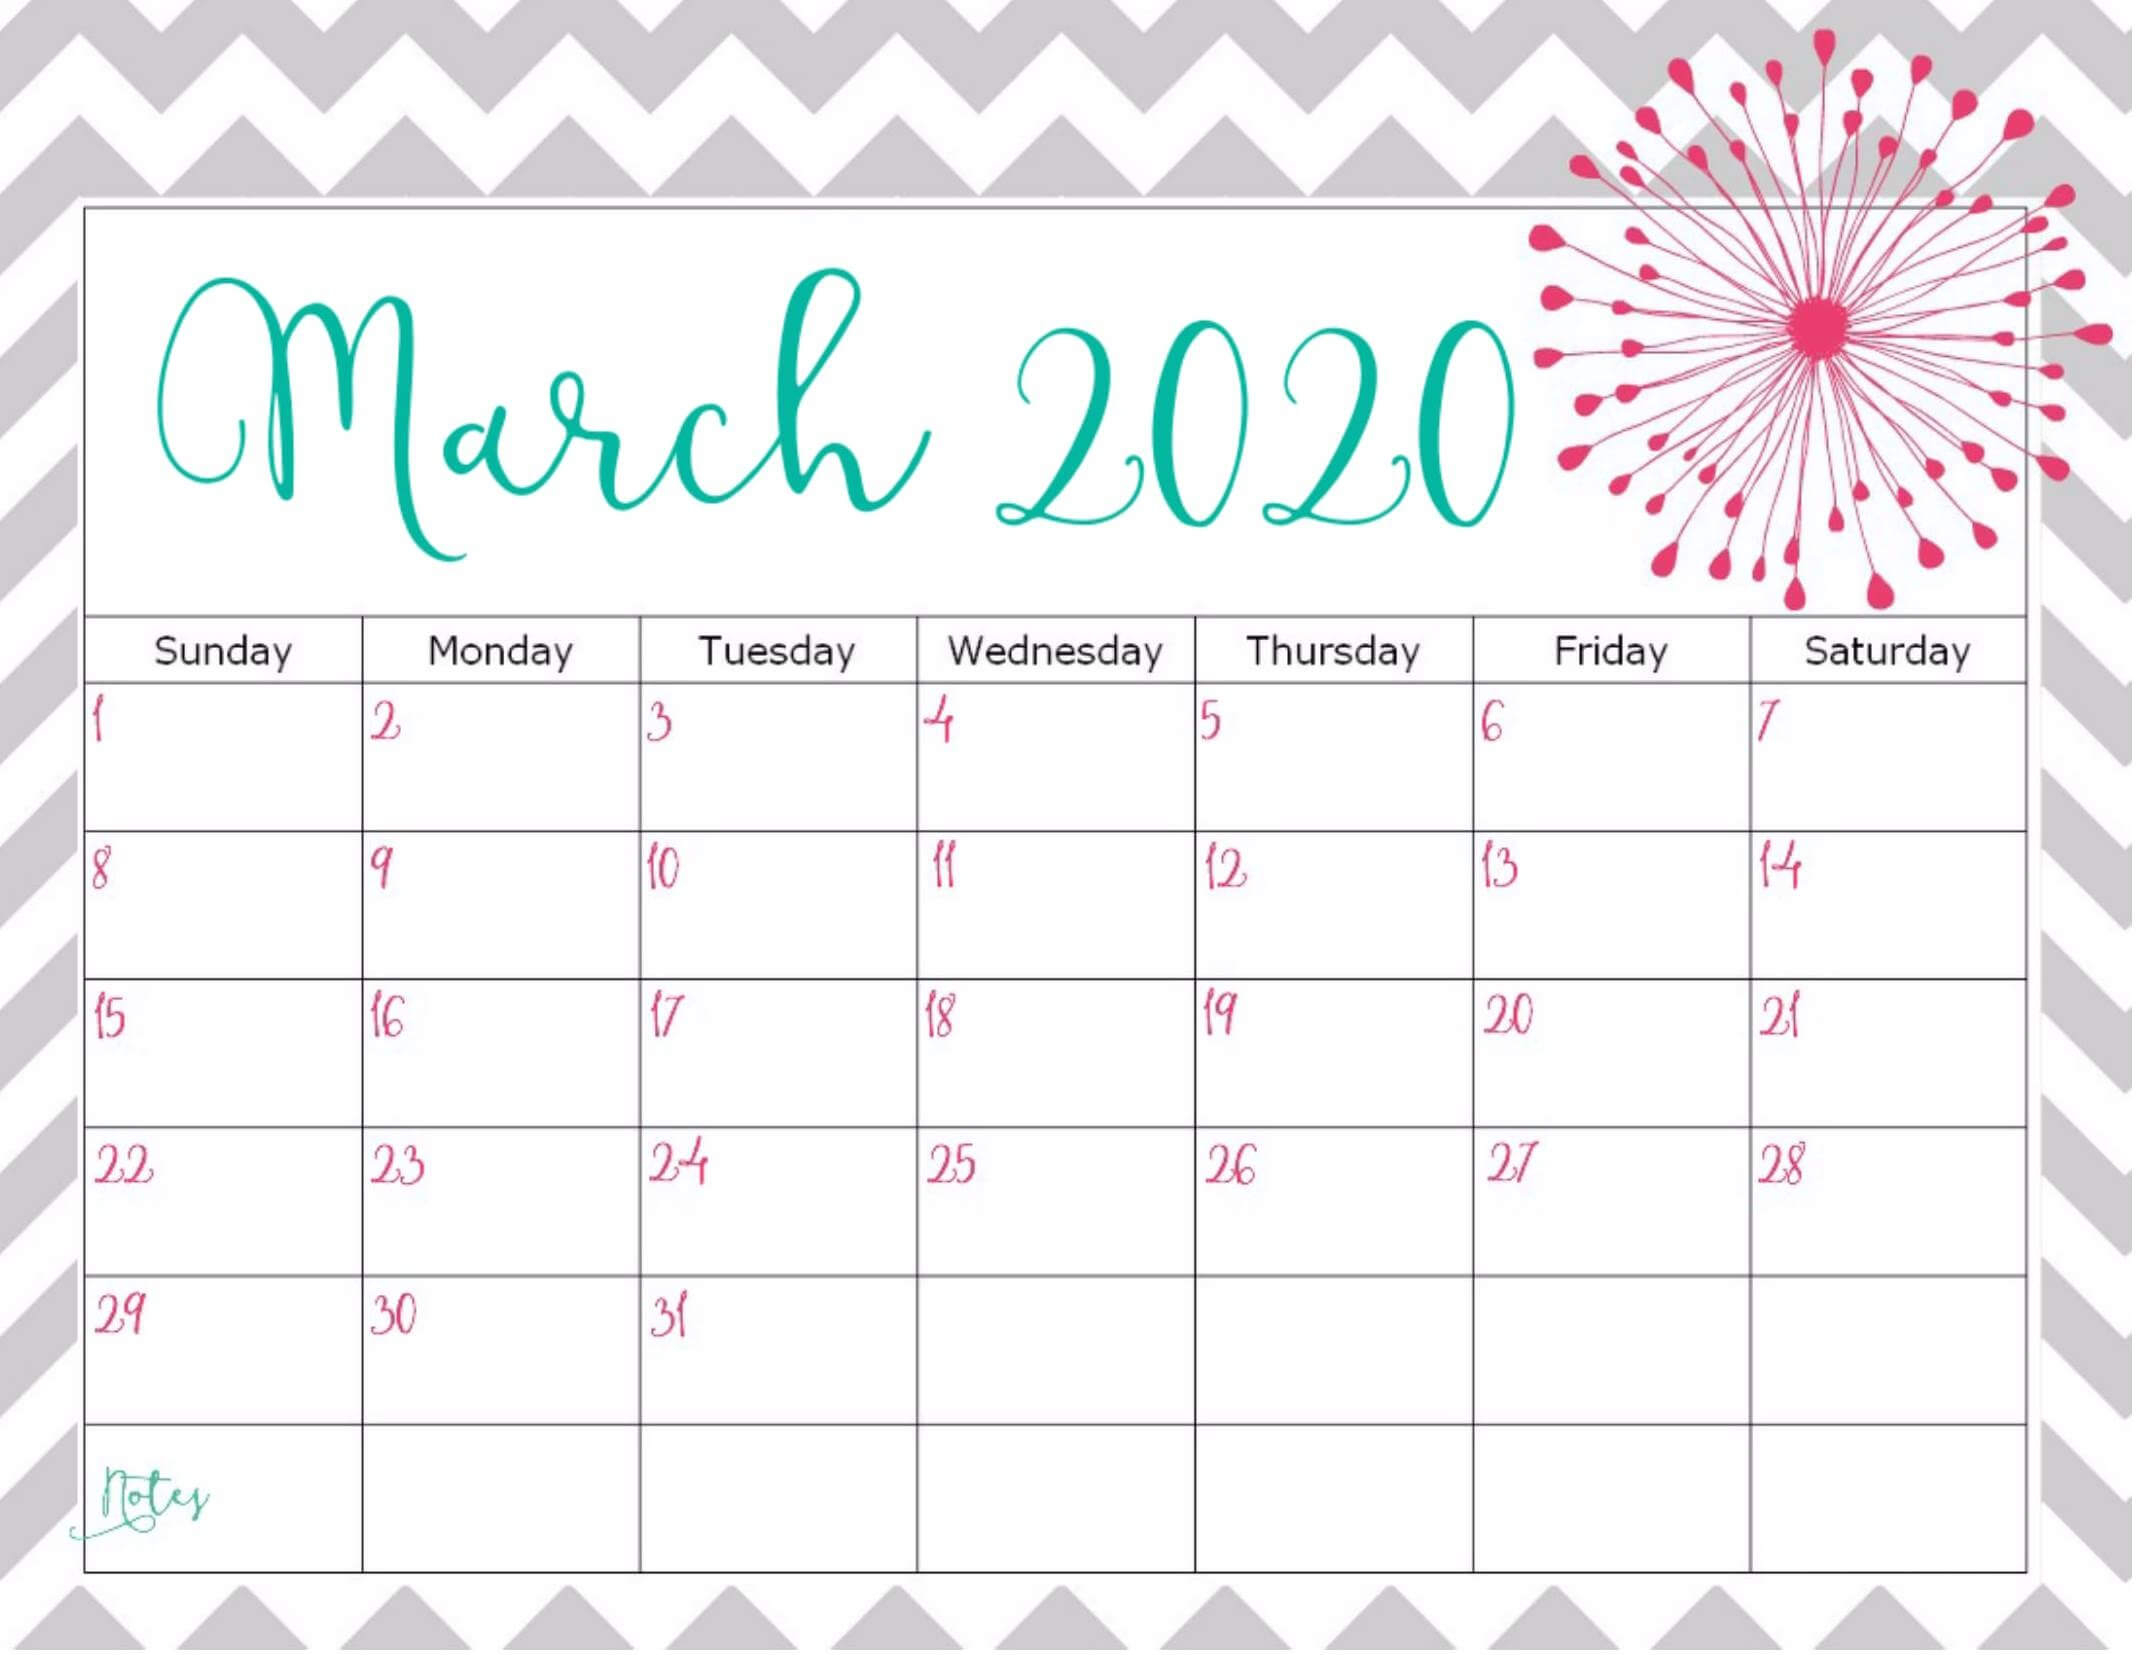 March 2020 Calendar With Holidays Template - 2019